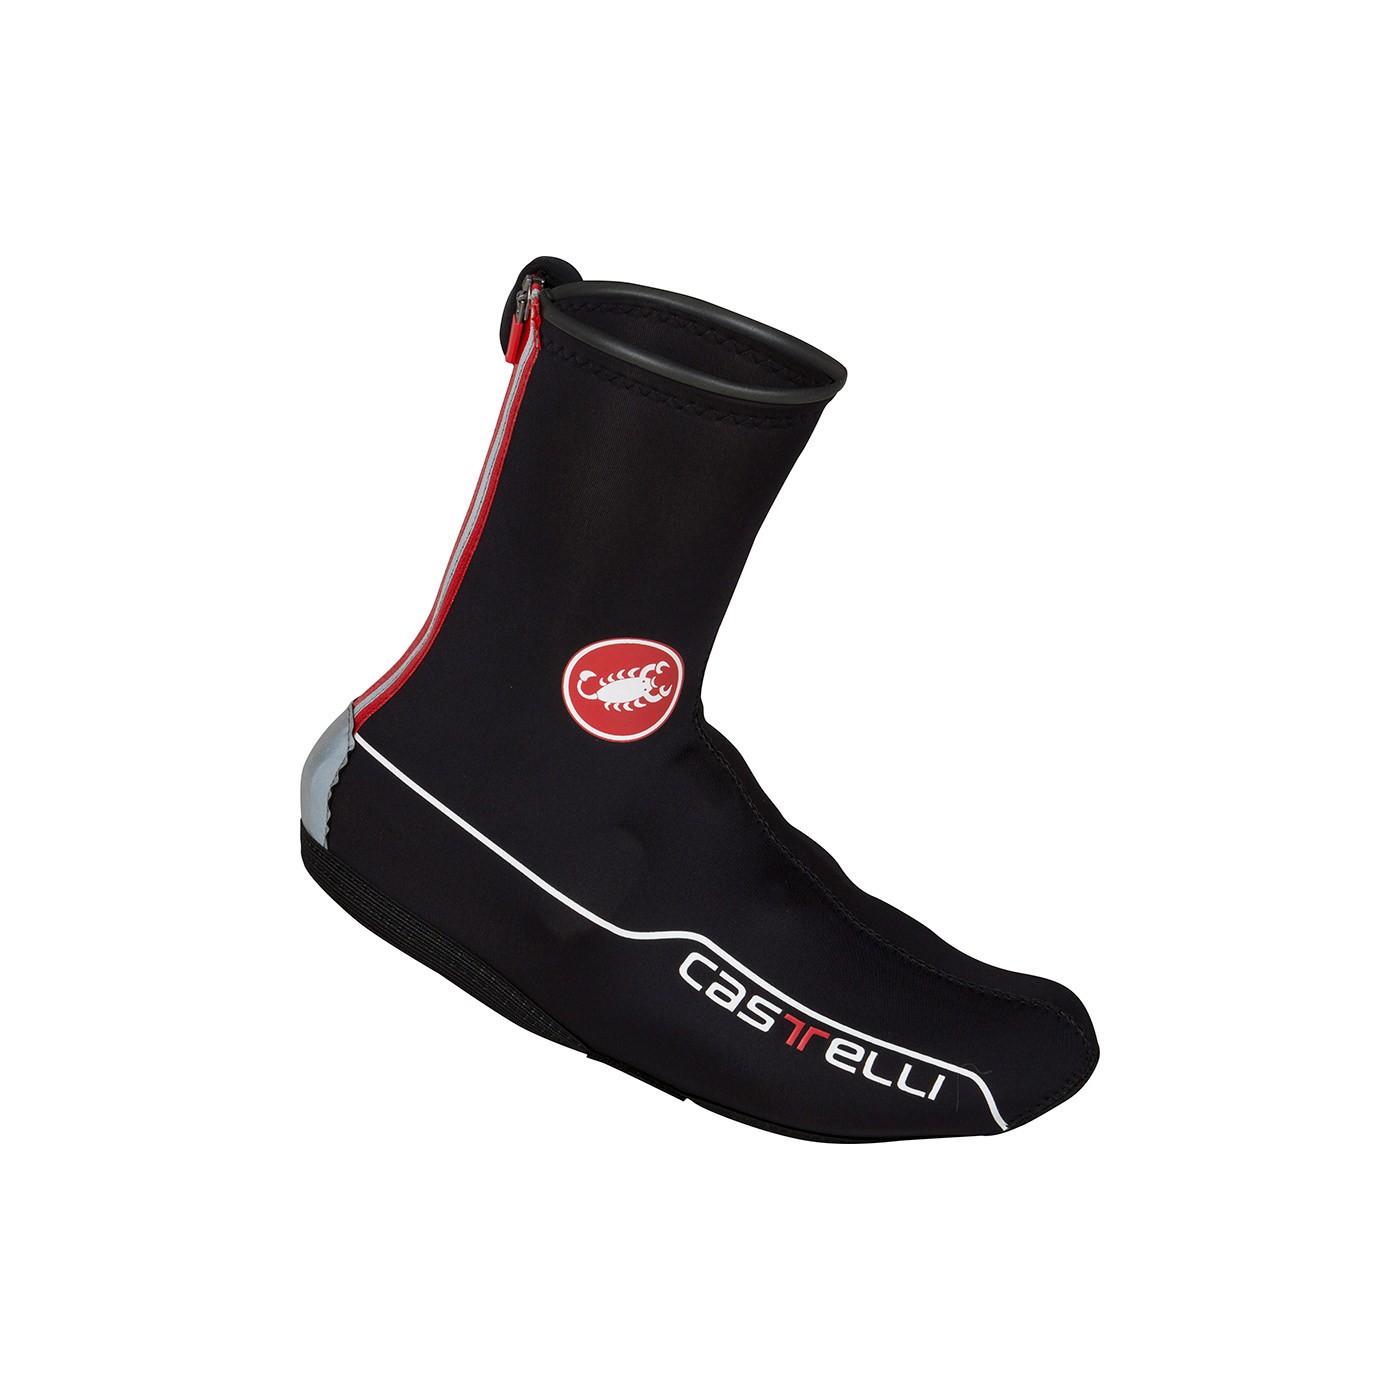 Castelli diluvio 2 all road couvre chaussure noir